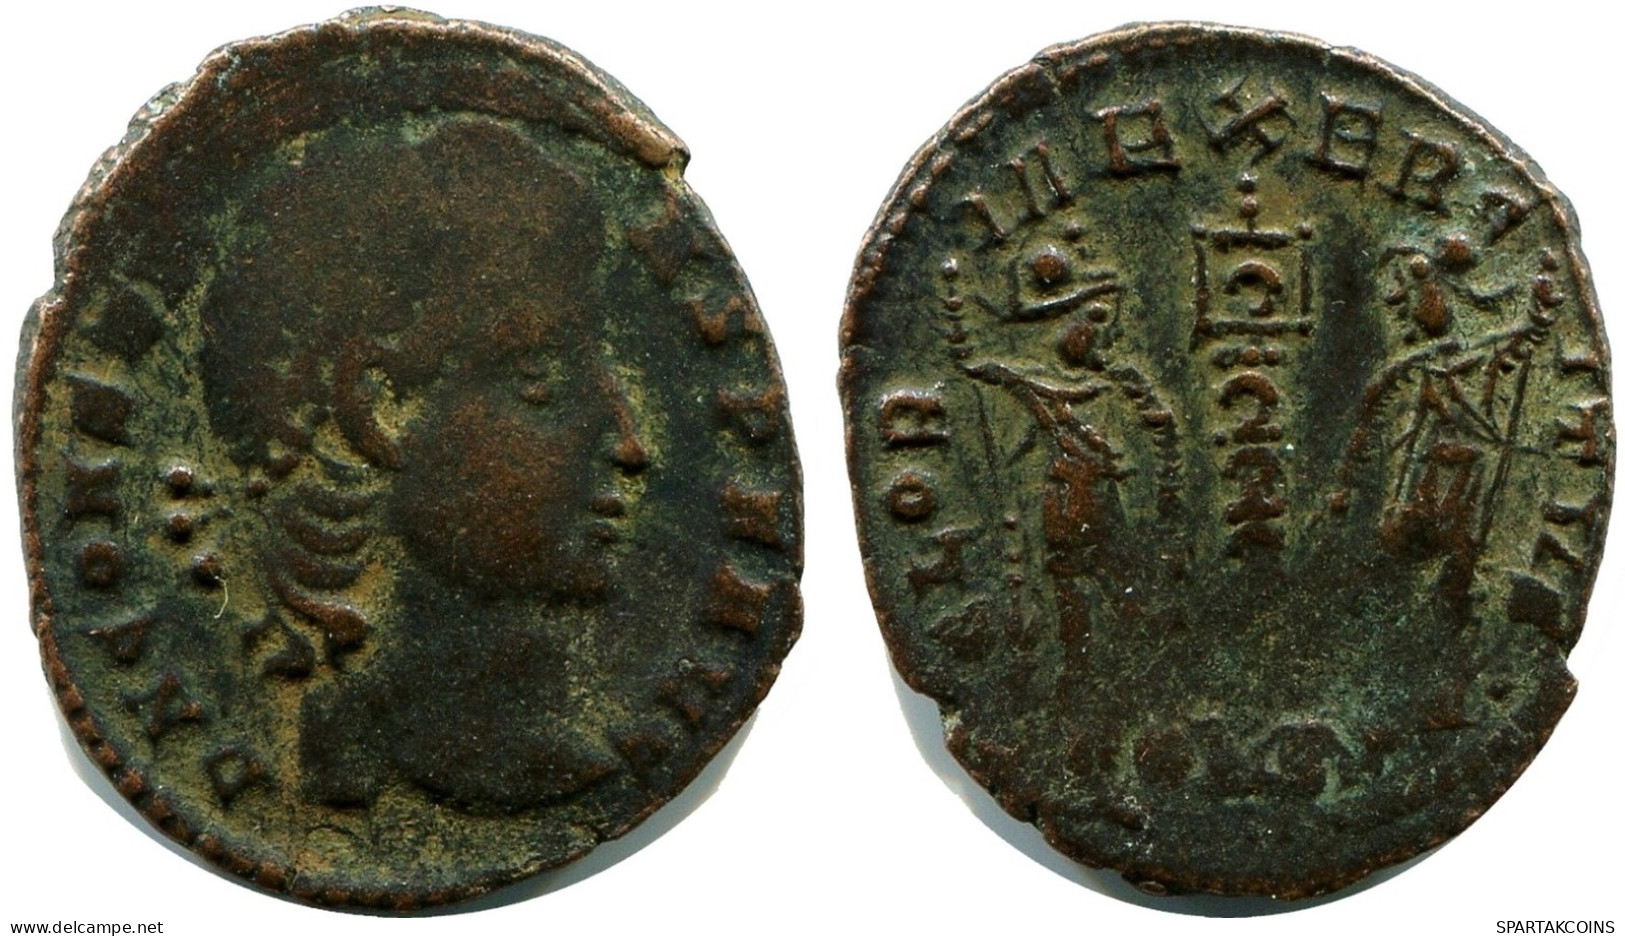 CONSTANS MINTED IN CONSTANTINOPLE FROM THE ROYAL ONTARIO MUSEUM #ANC11940.14.E.A - L'Empire Chrétien (307 à 363)